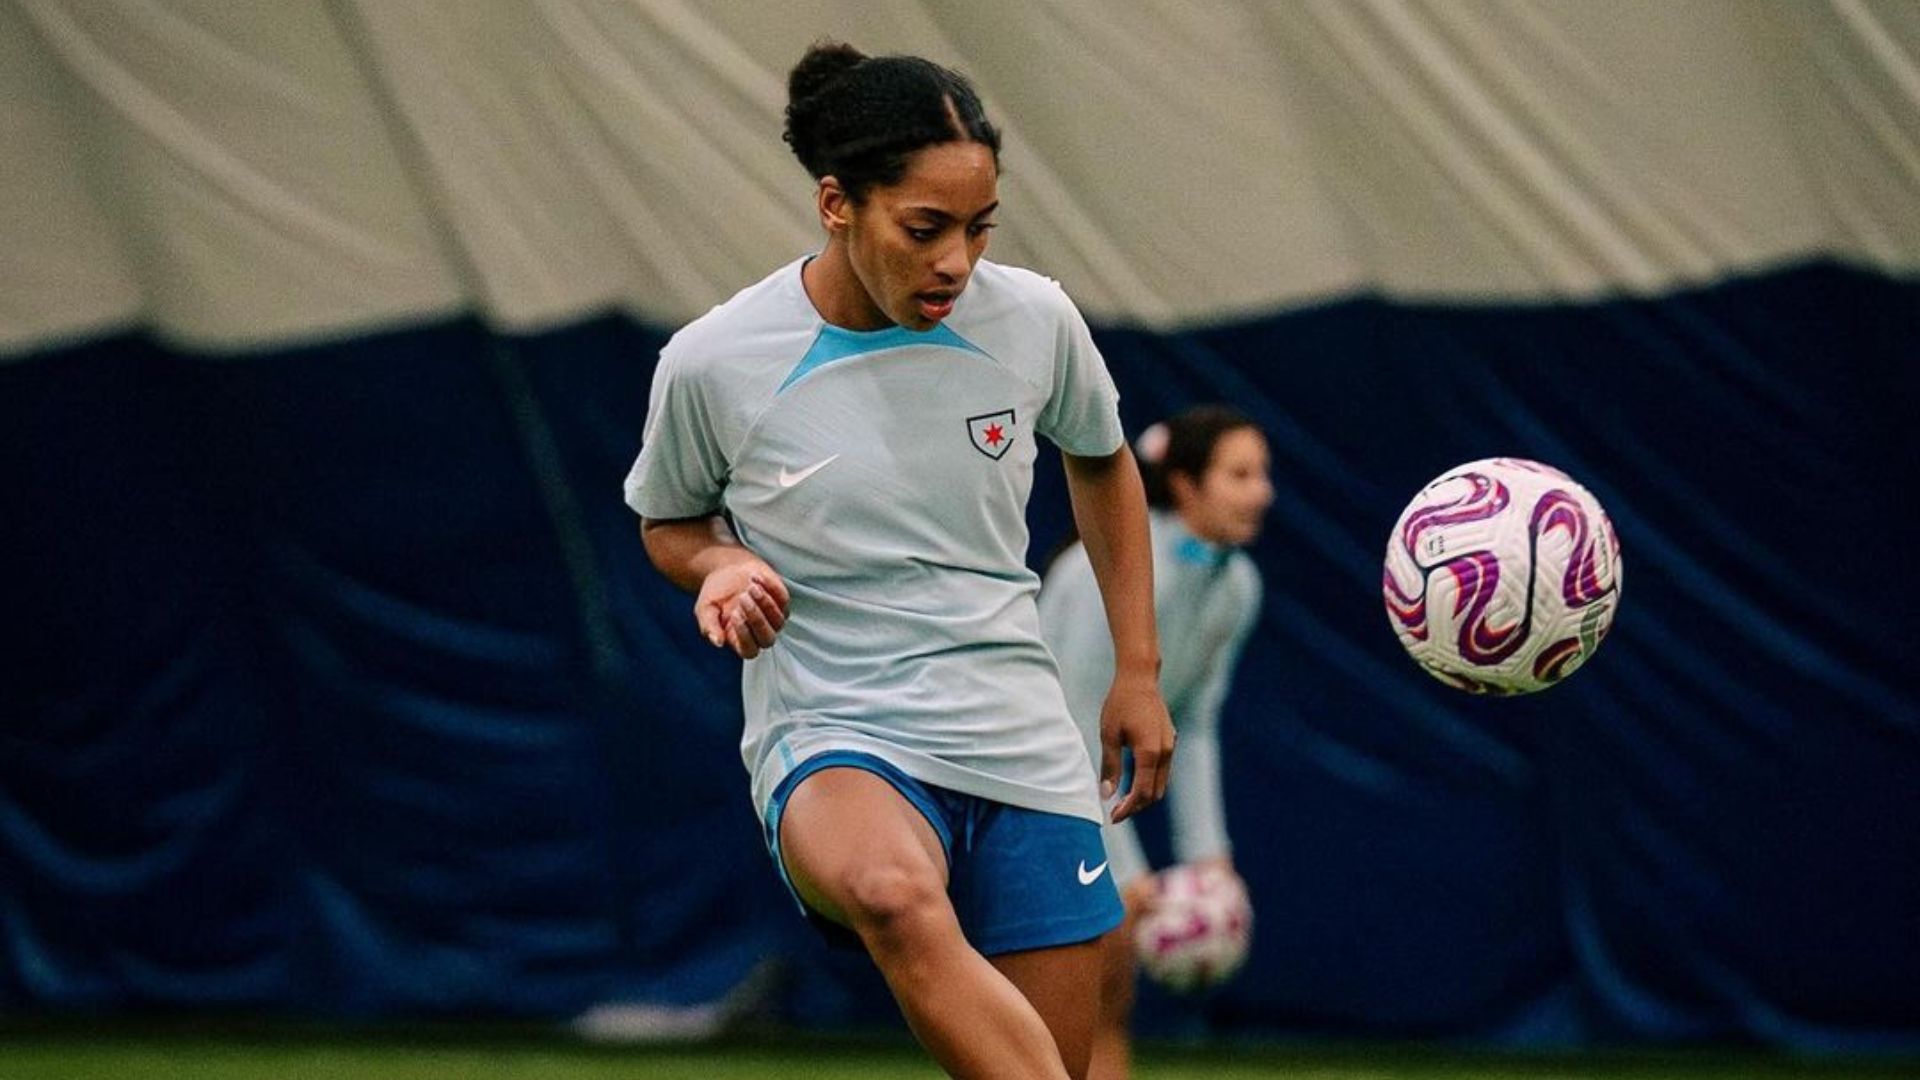 Nadia Gomes on the Chicago Red Stars